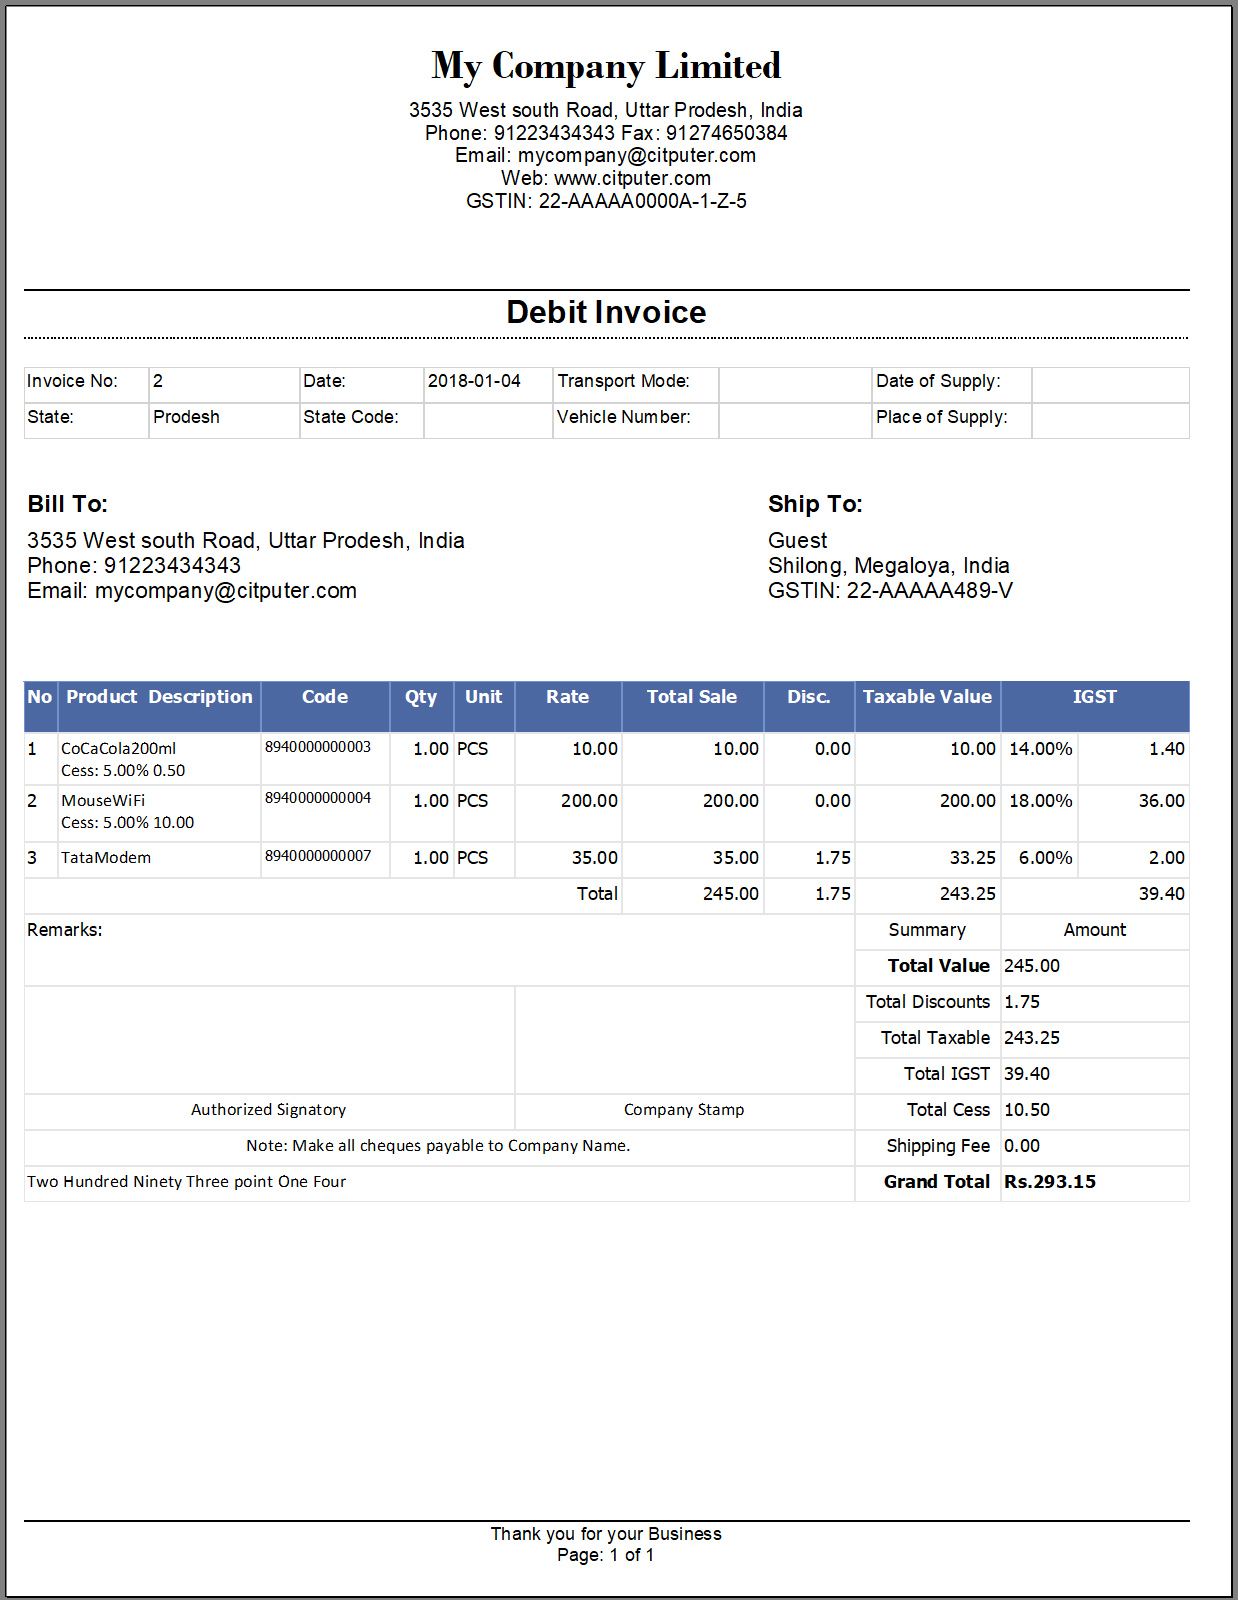 GST Billing System POS - Invoice Manager - 1